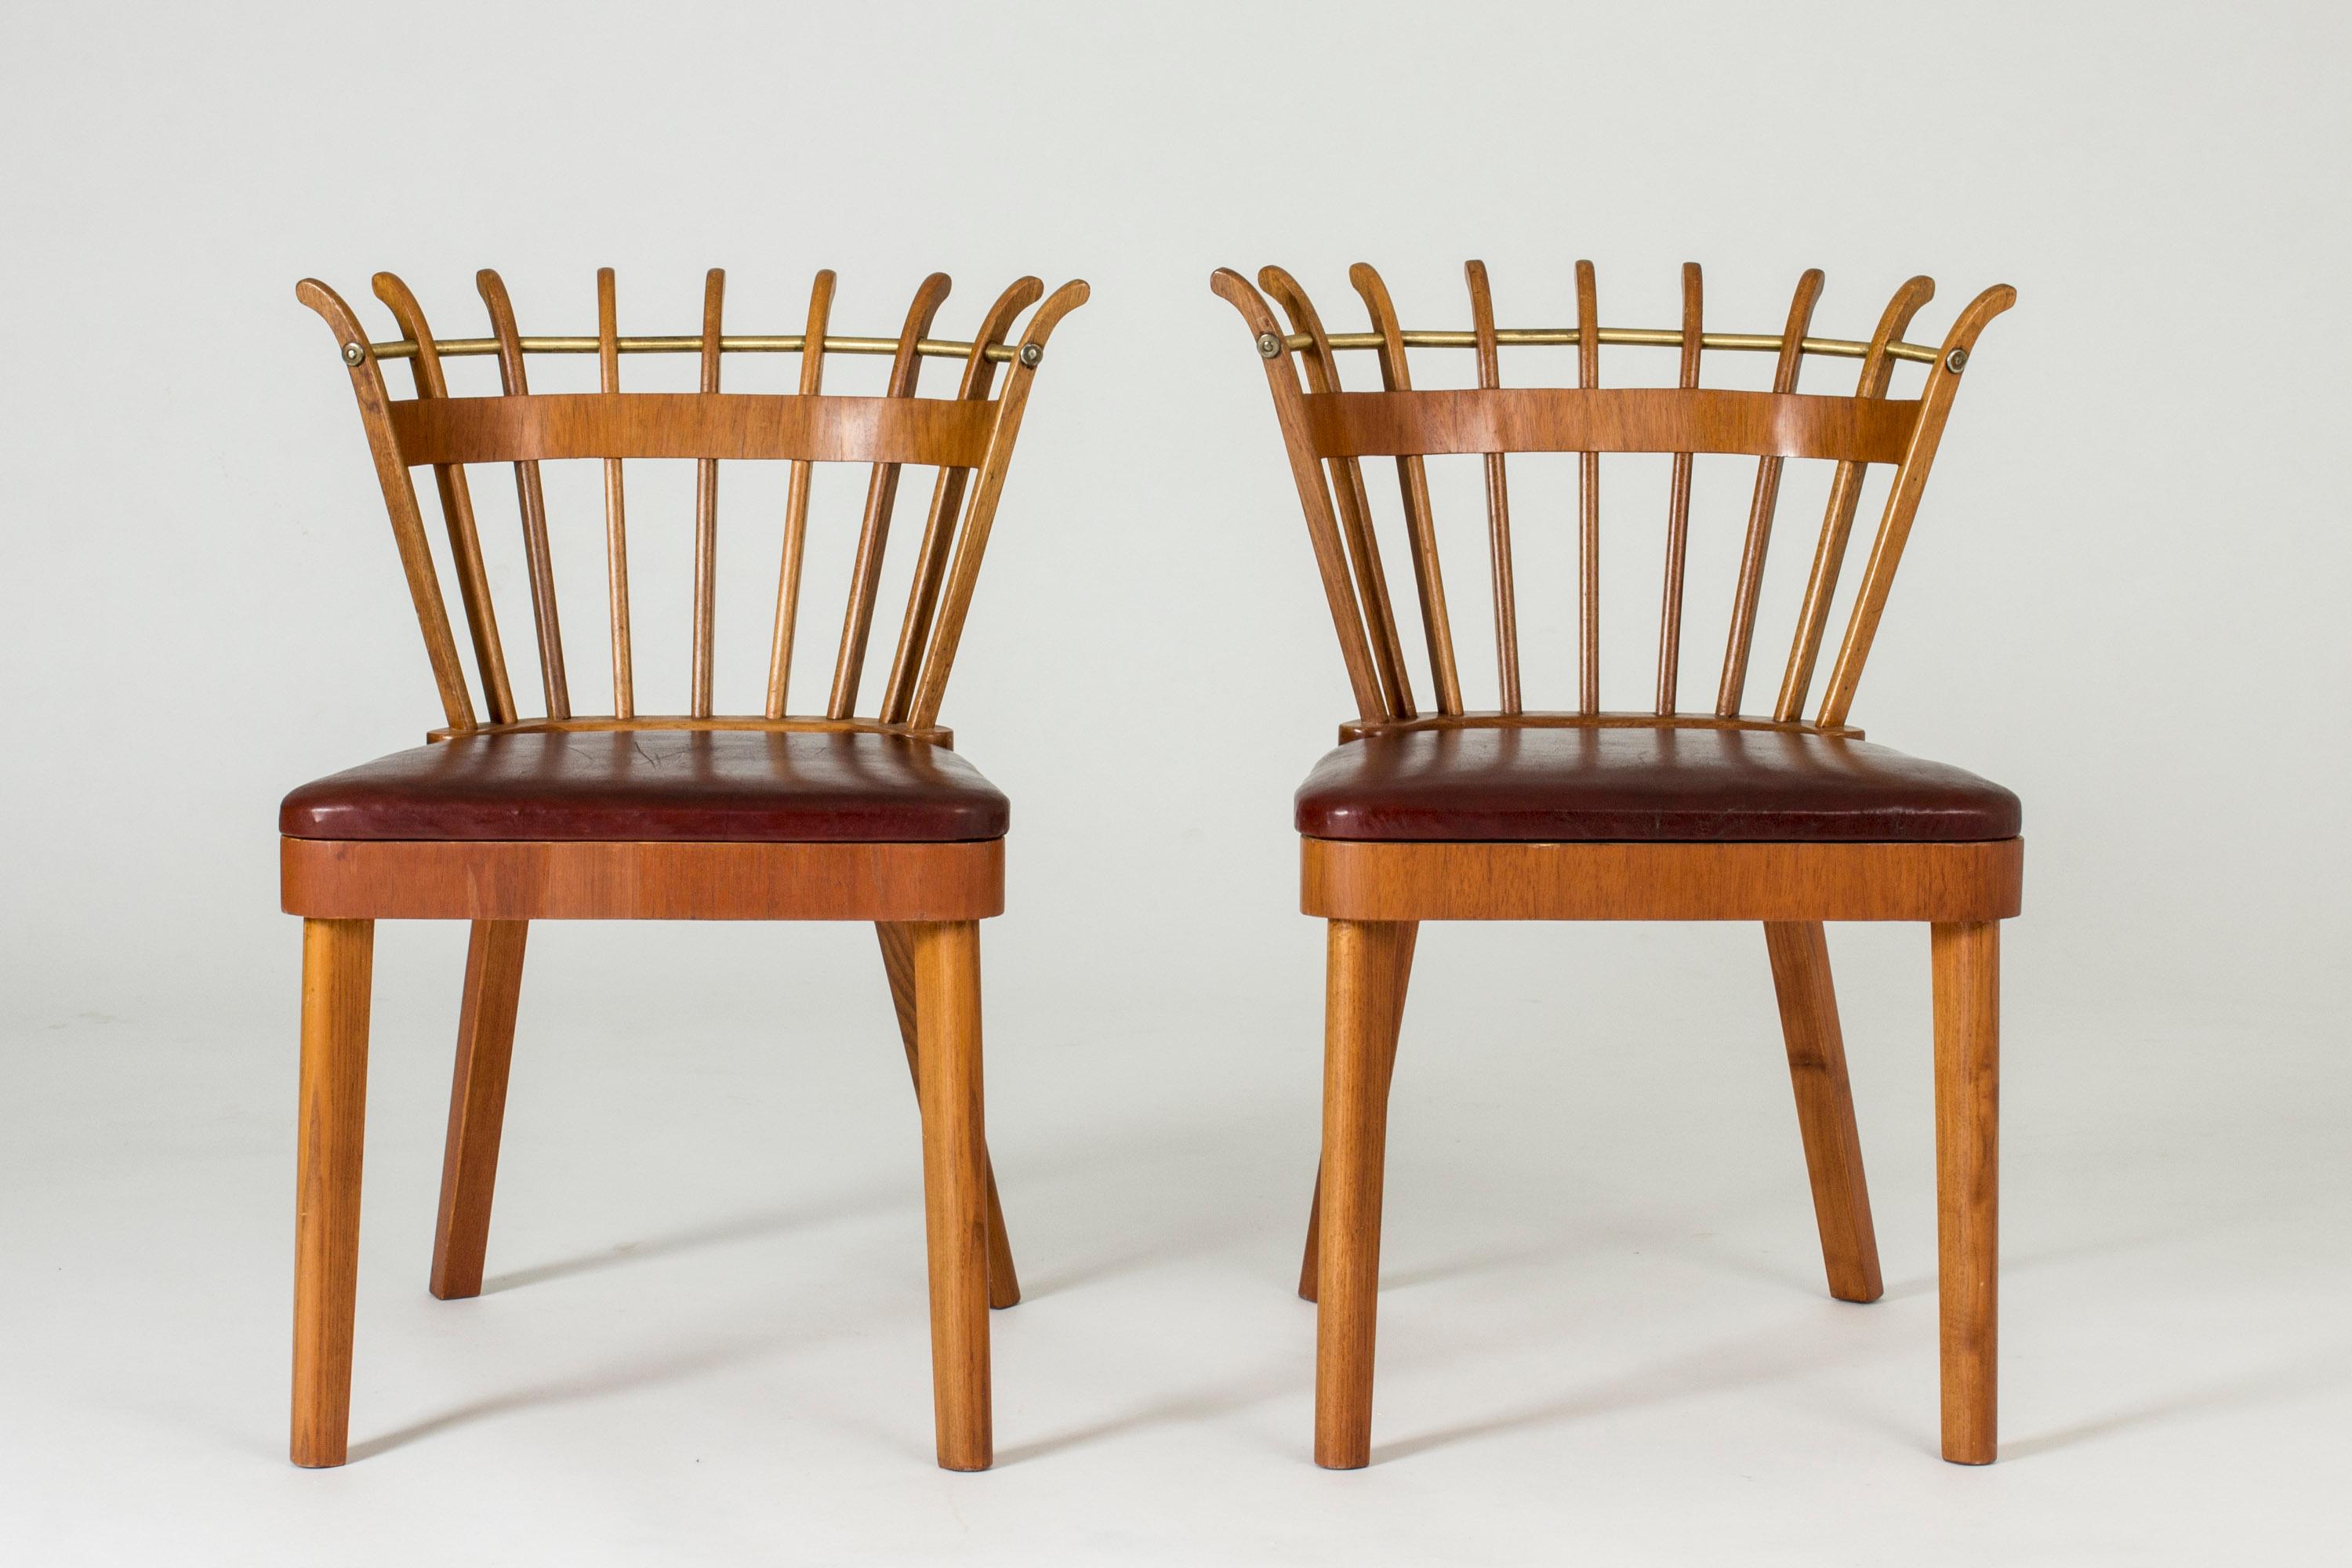 Pair of cool Swedish modern occasional chairs, signed “Stockholm, 1946” by their maker. Backs made from bars spread out like fans, red leather seats. Somewhat compact, clean lines.

Measures: Seat height 42 cm.